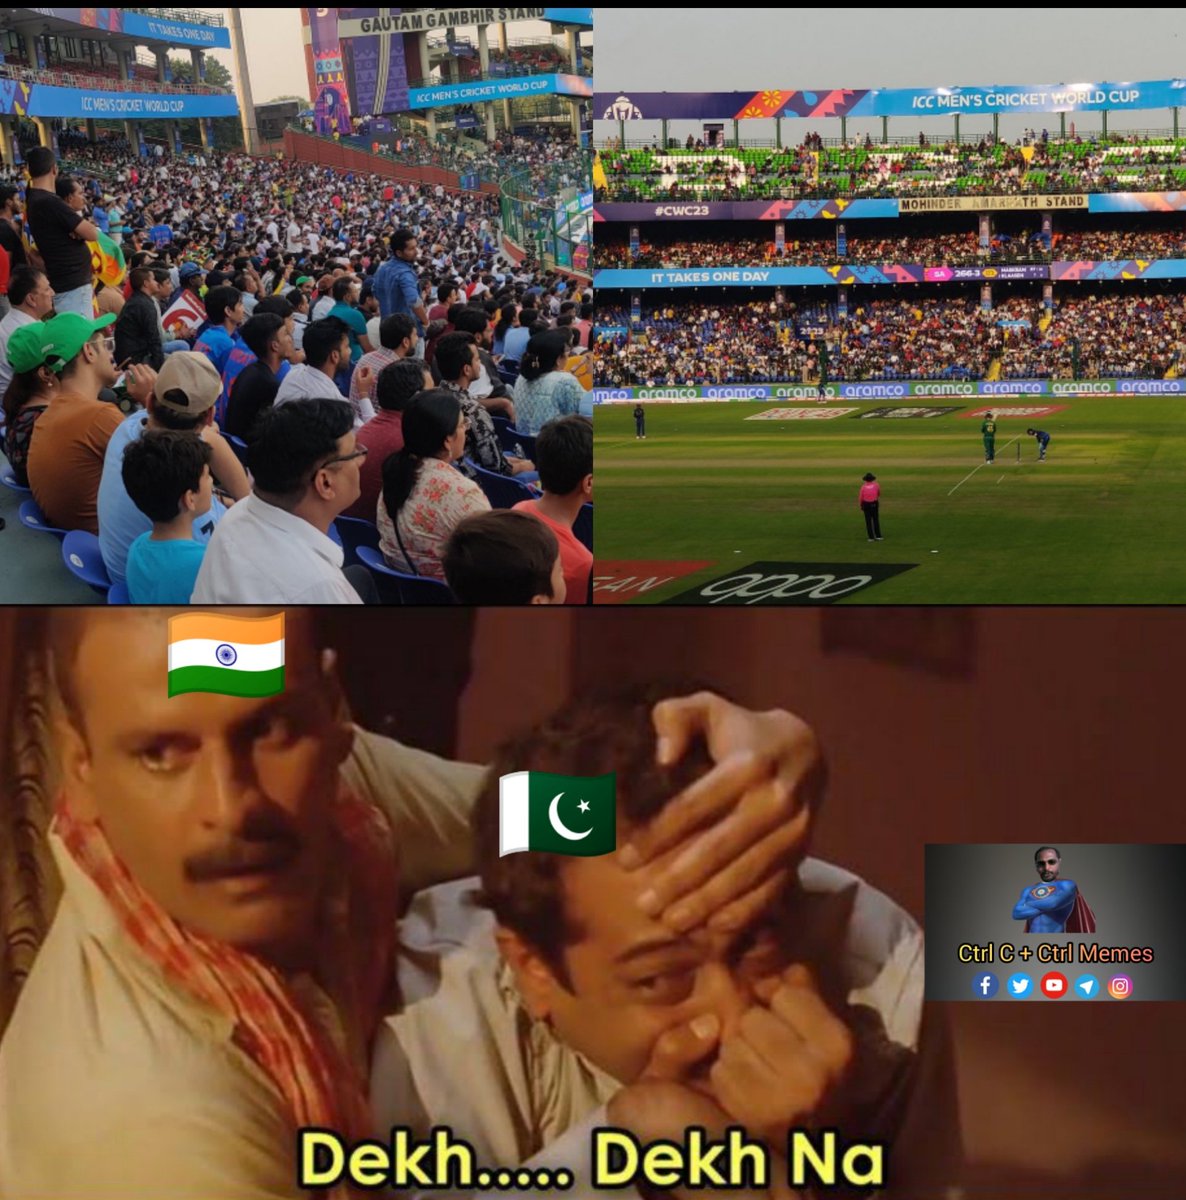 The stadium is a Full House in a non Indian Match
Where are Jealous Pakistanis?

#SLvSA
#icccricketworldcup2023 
#ICCWorldCup2023